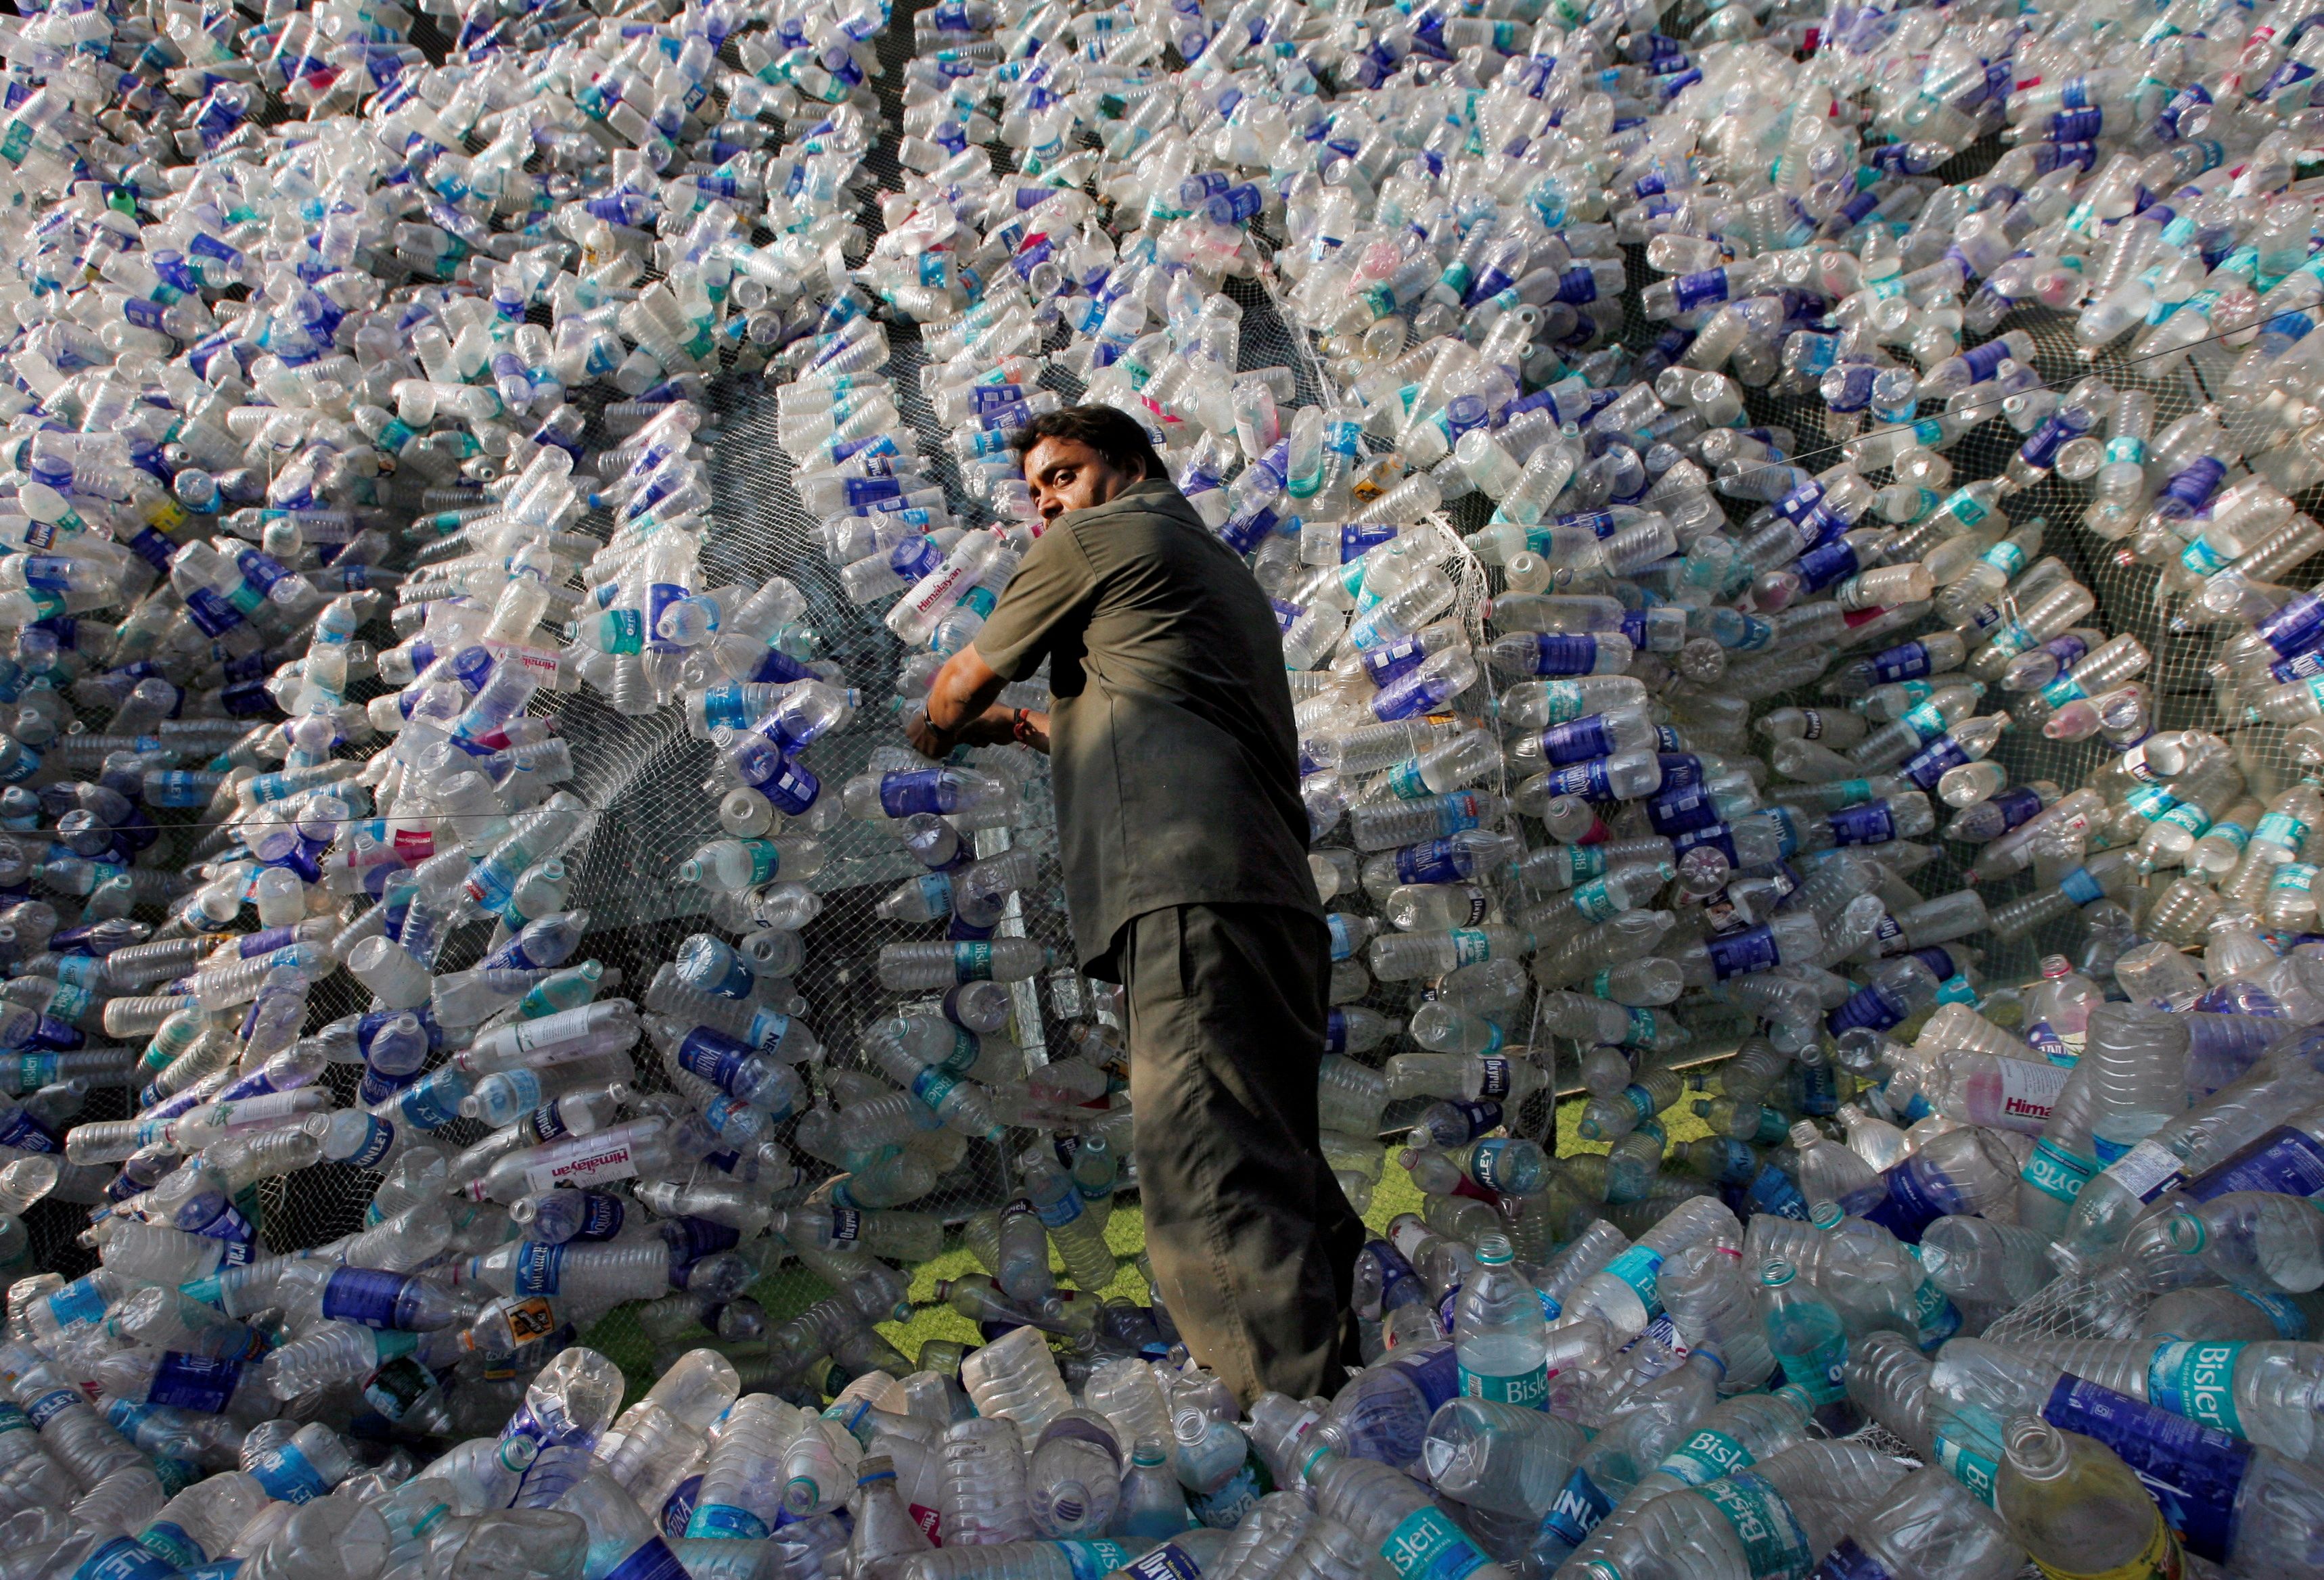 An employee of Mumbai Educational Trust (MET), which runs educational institutes, adjusts plastic bottles in an installation made of approximately 40,000 plastic bottles to protest the use of plastic, in Mumbai November 19, 2009. REUTERS/Arko Datta